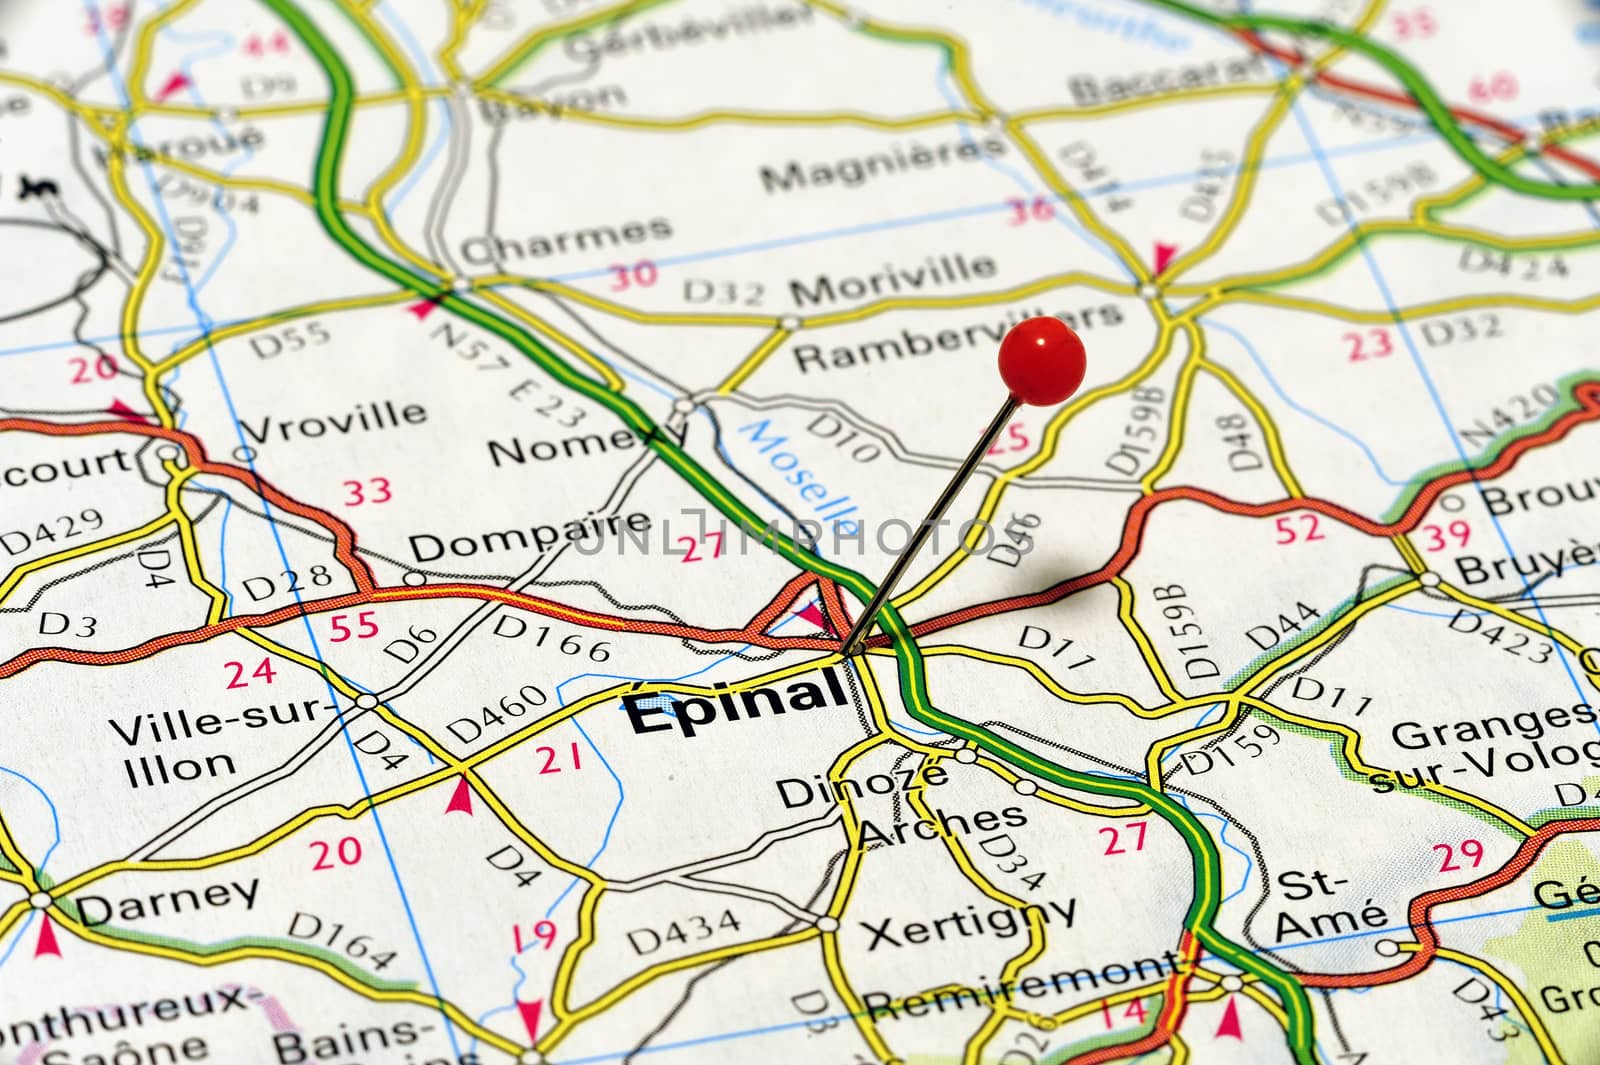 Closeup map of Epinal, Epinal is a city in northeastern France.